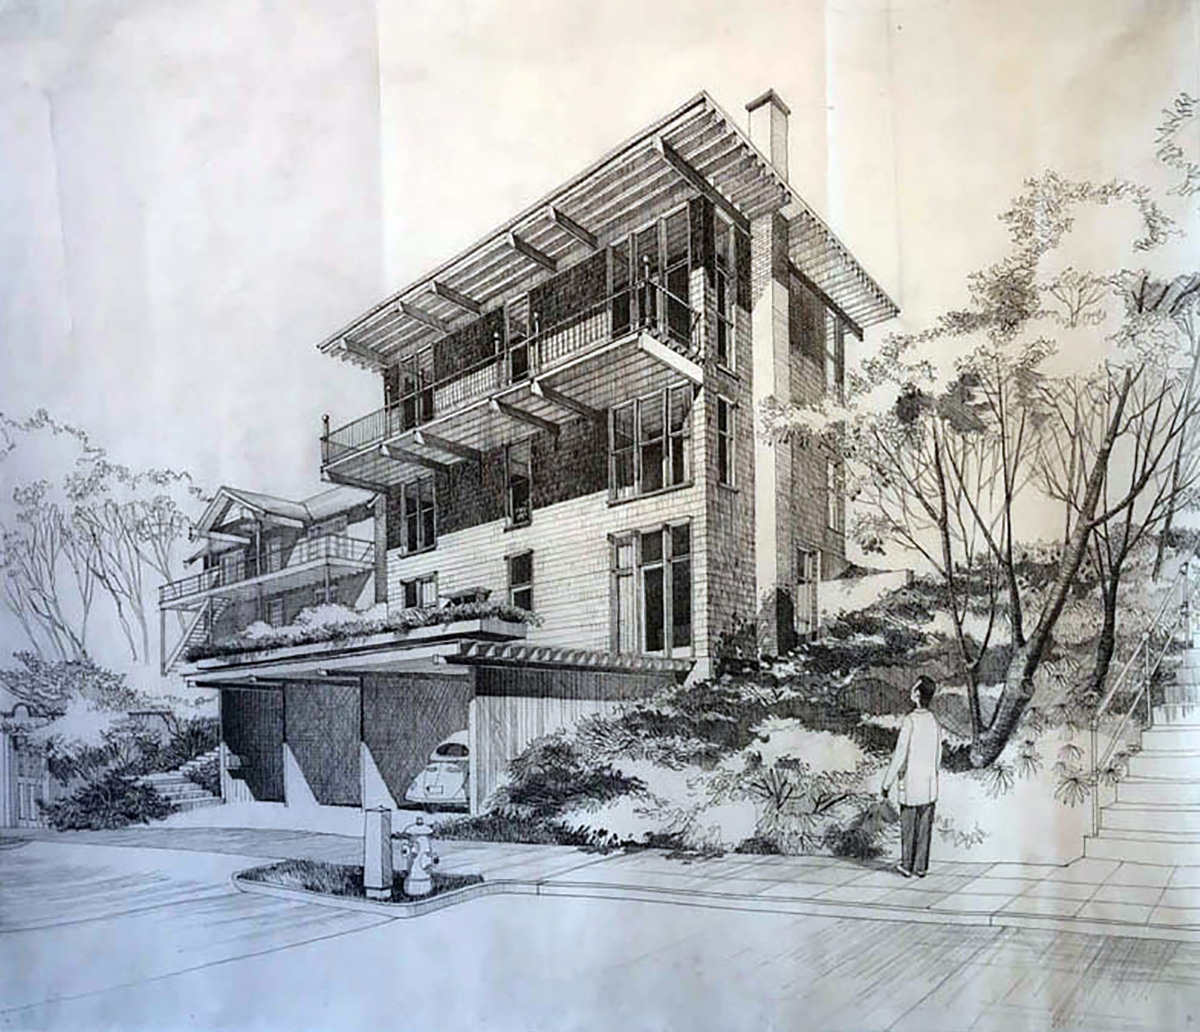 Drawing of the Streissguth House